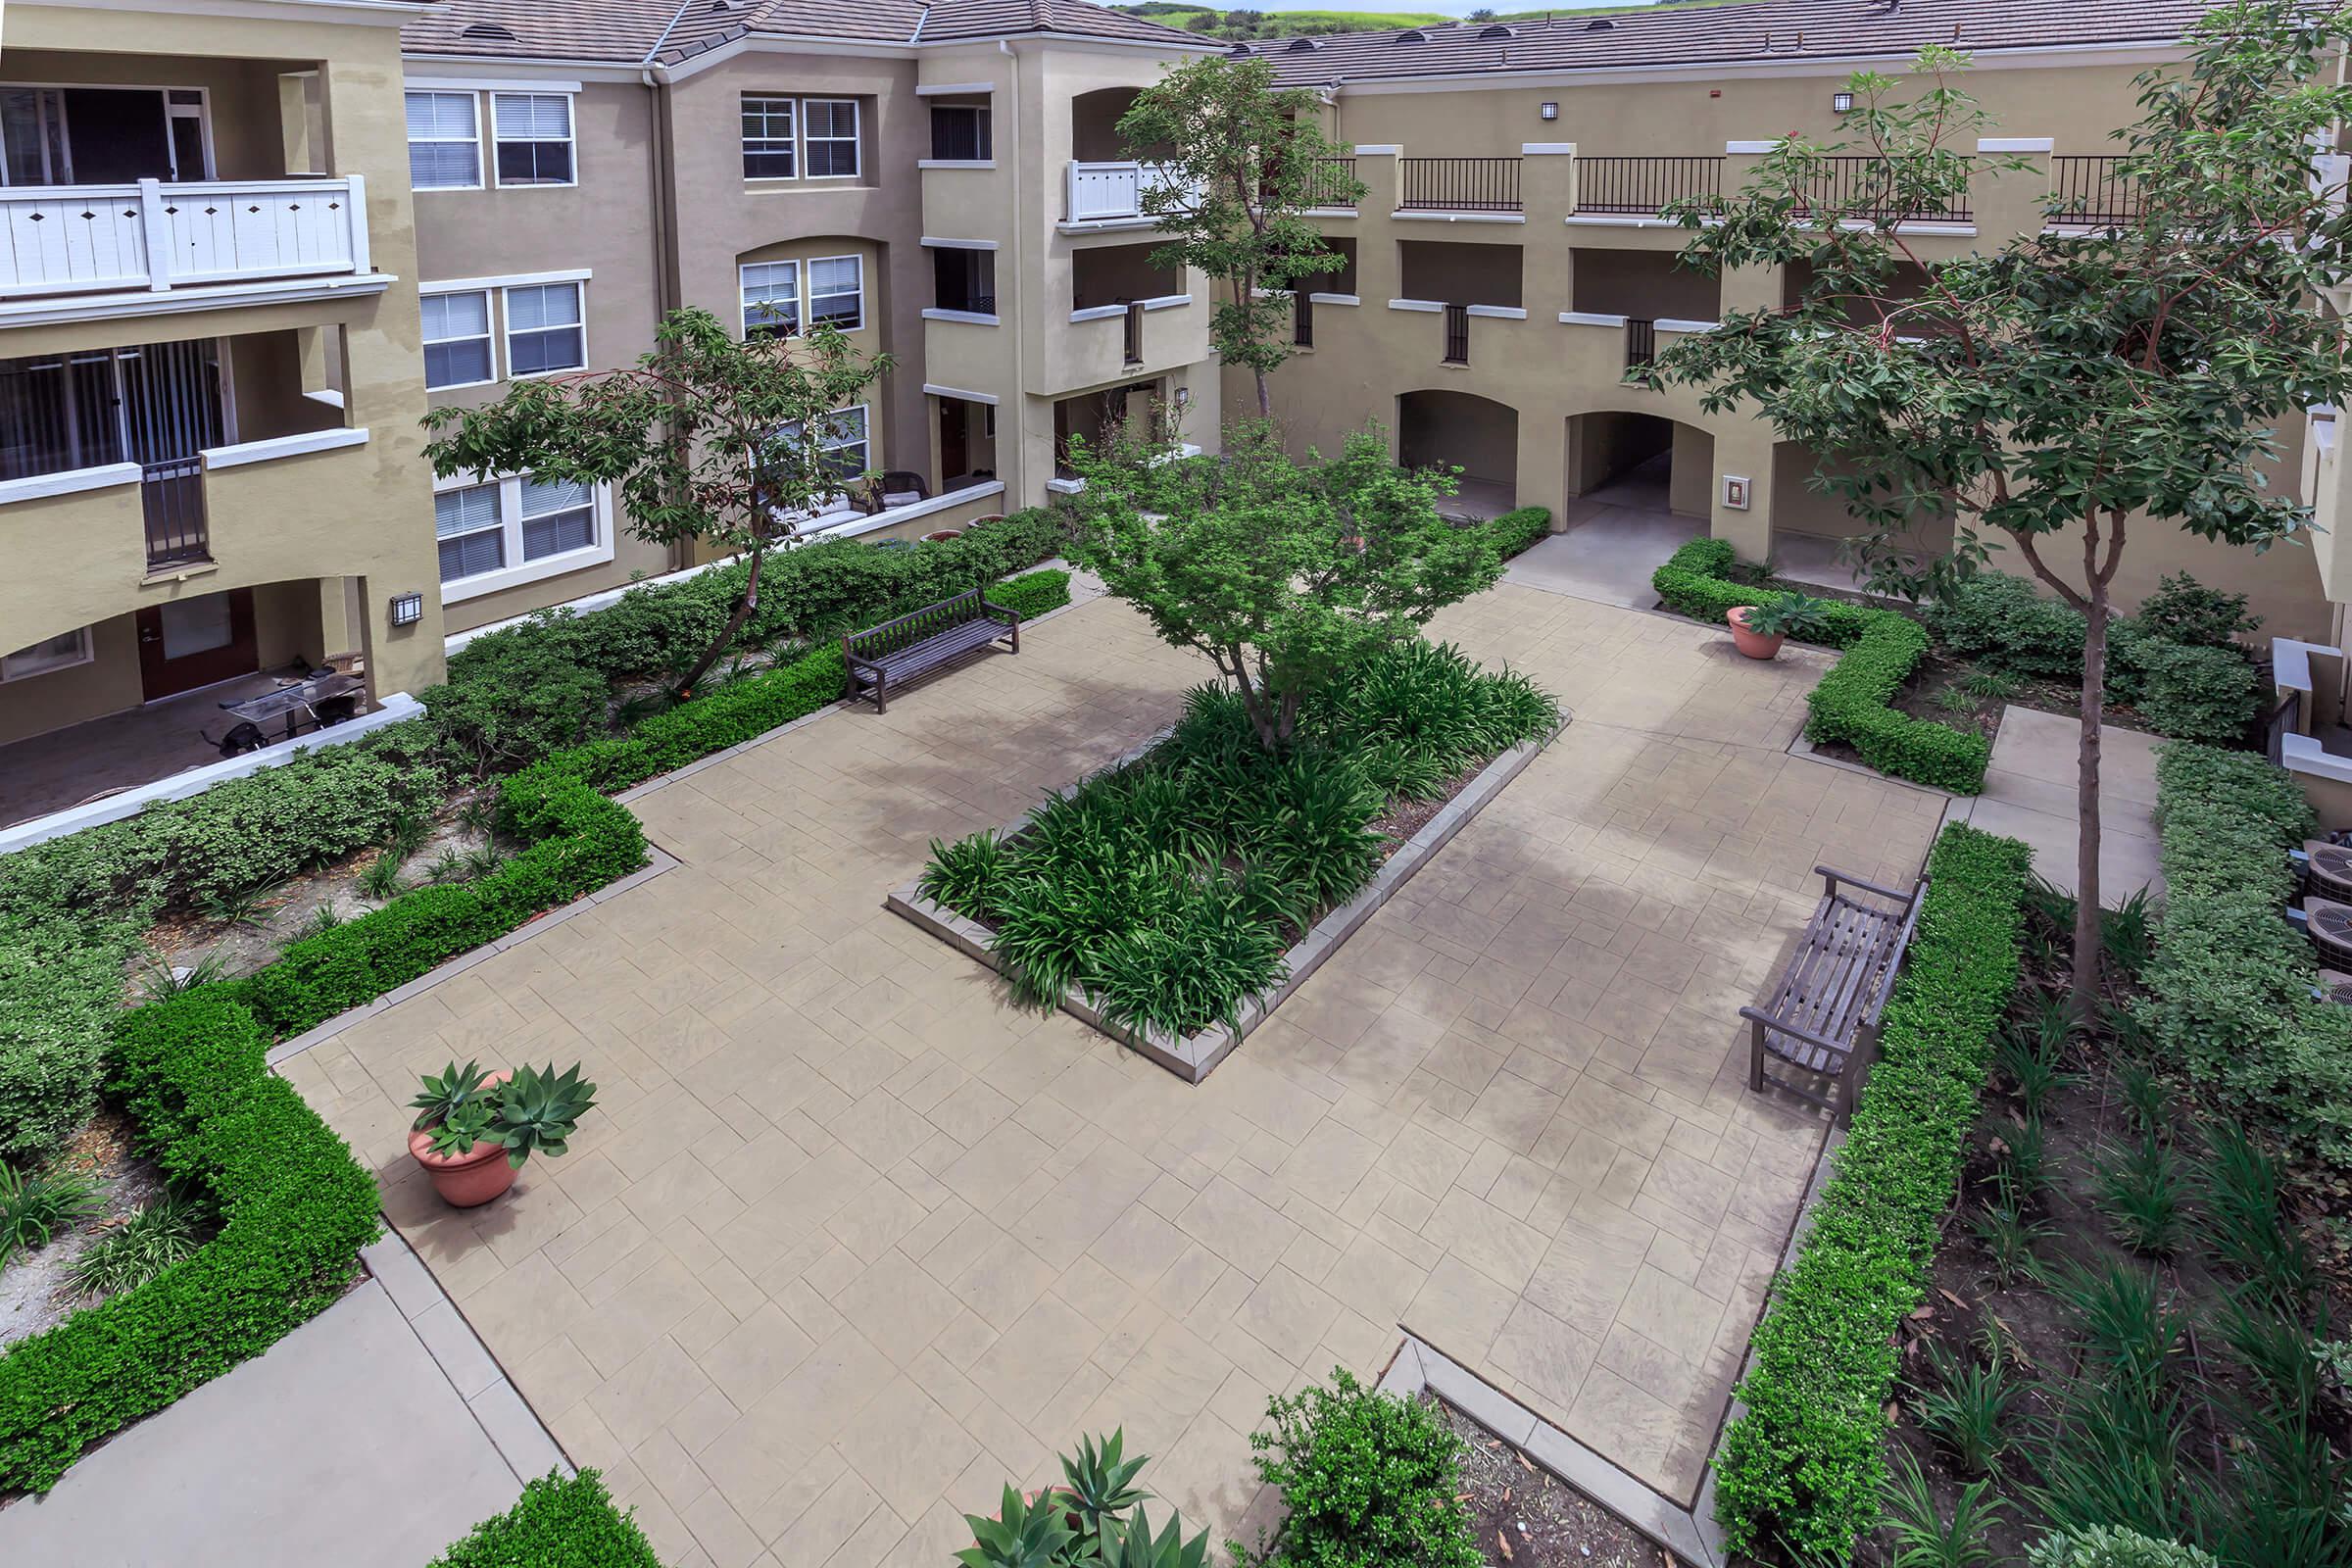 Laurel Terrace Apartment Homes courtyard with green landscaping